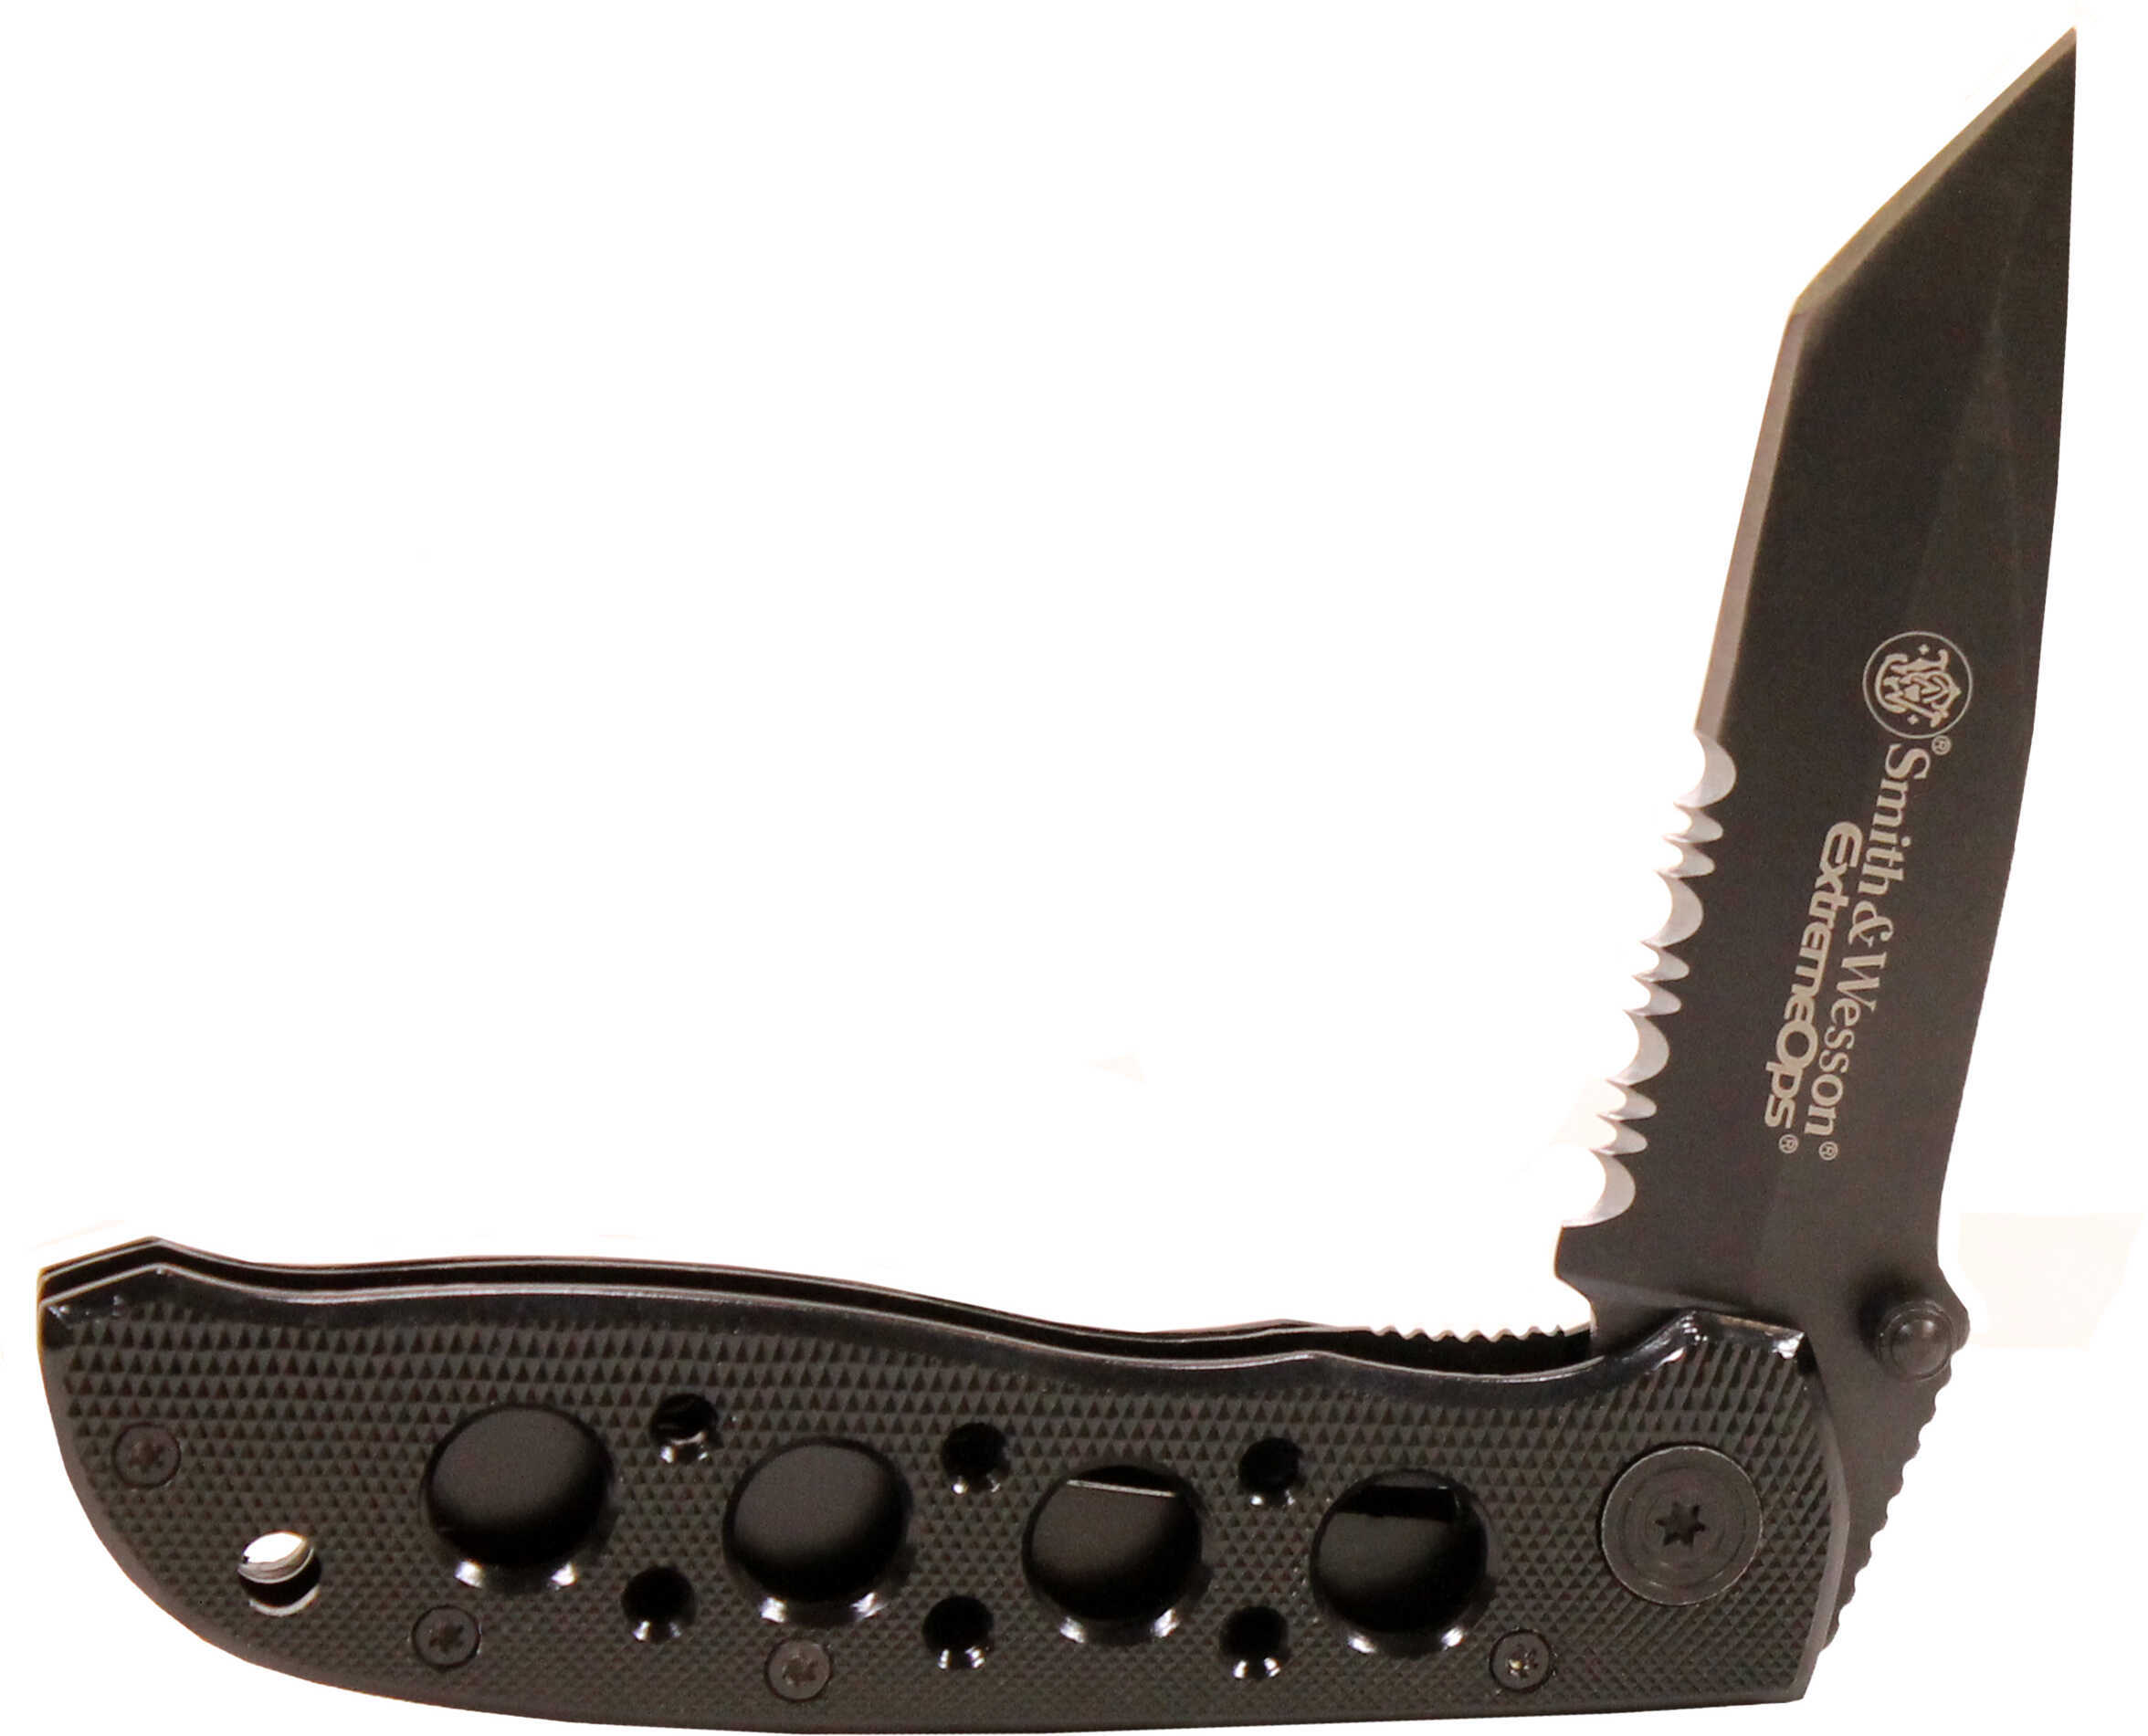 Smith & Wesson Extreme Ops Tanto Folding Knife 3 1/4" Blade Black